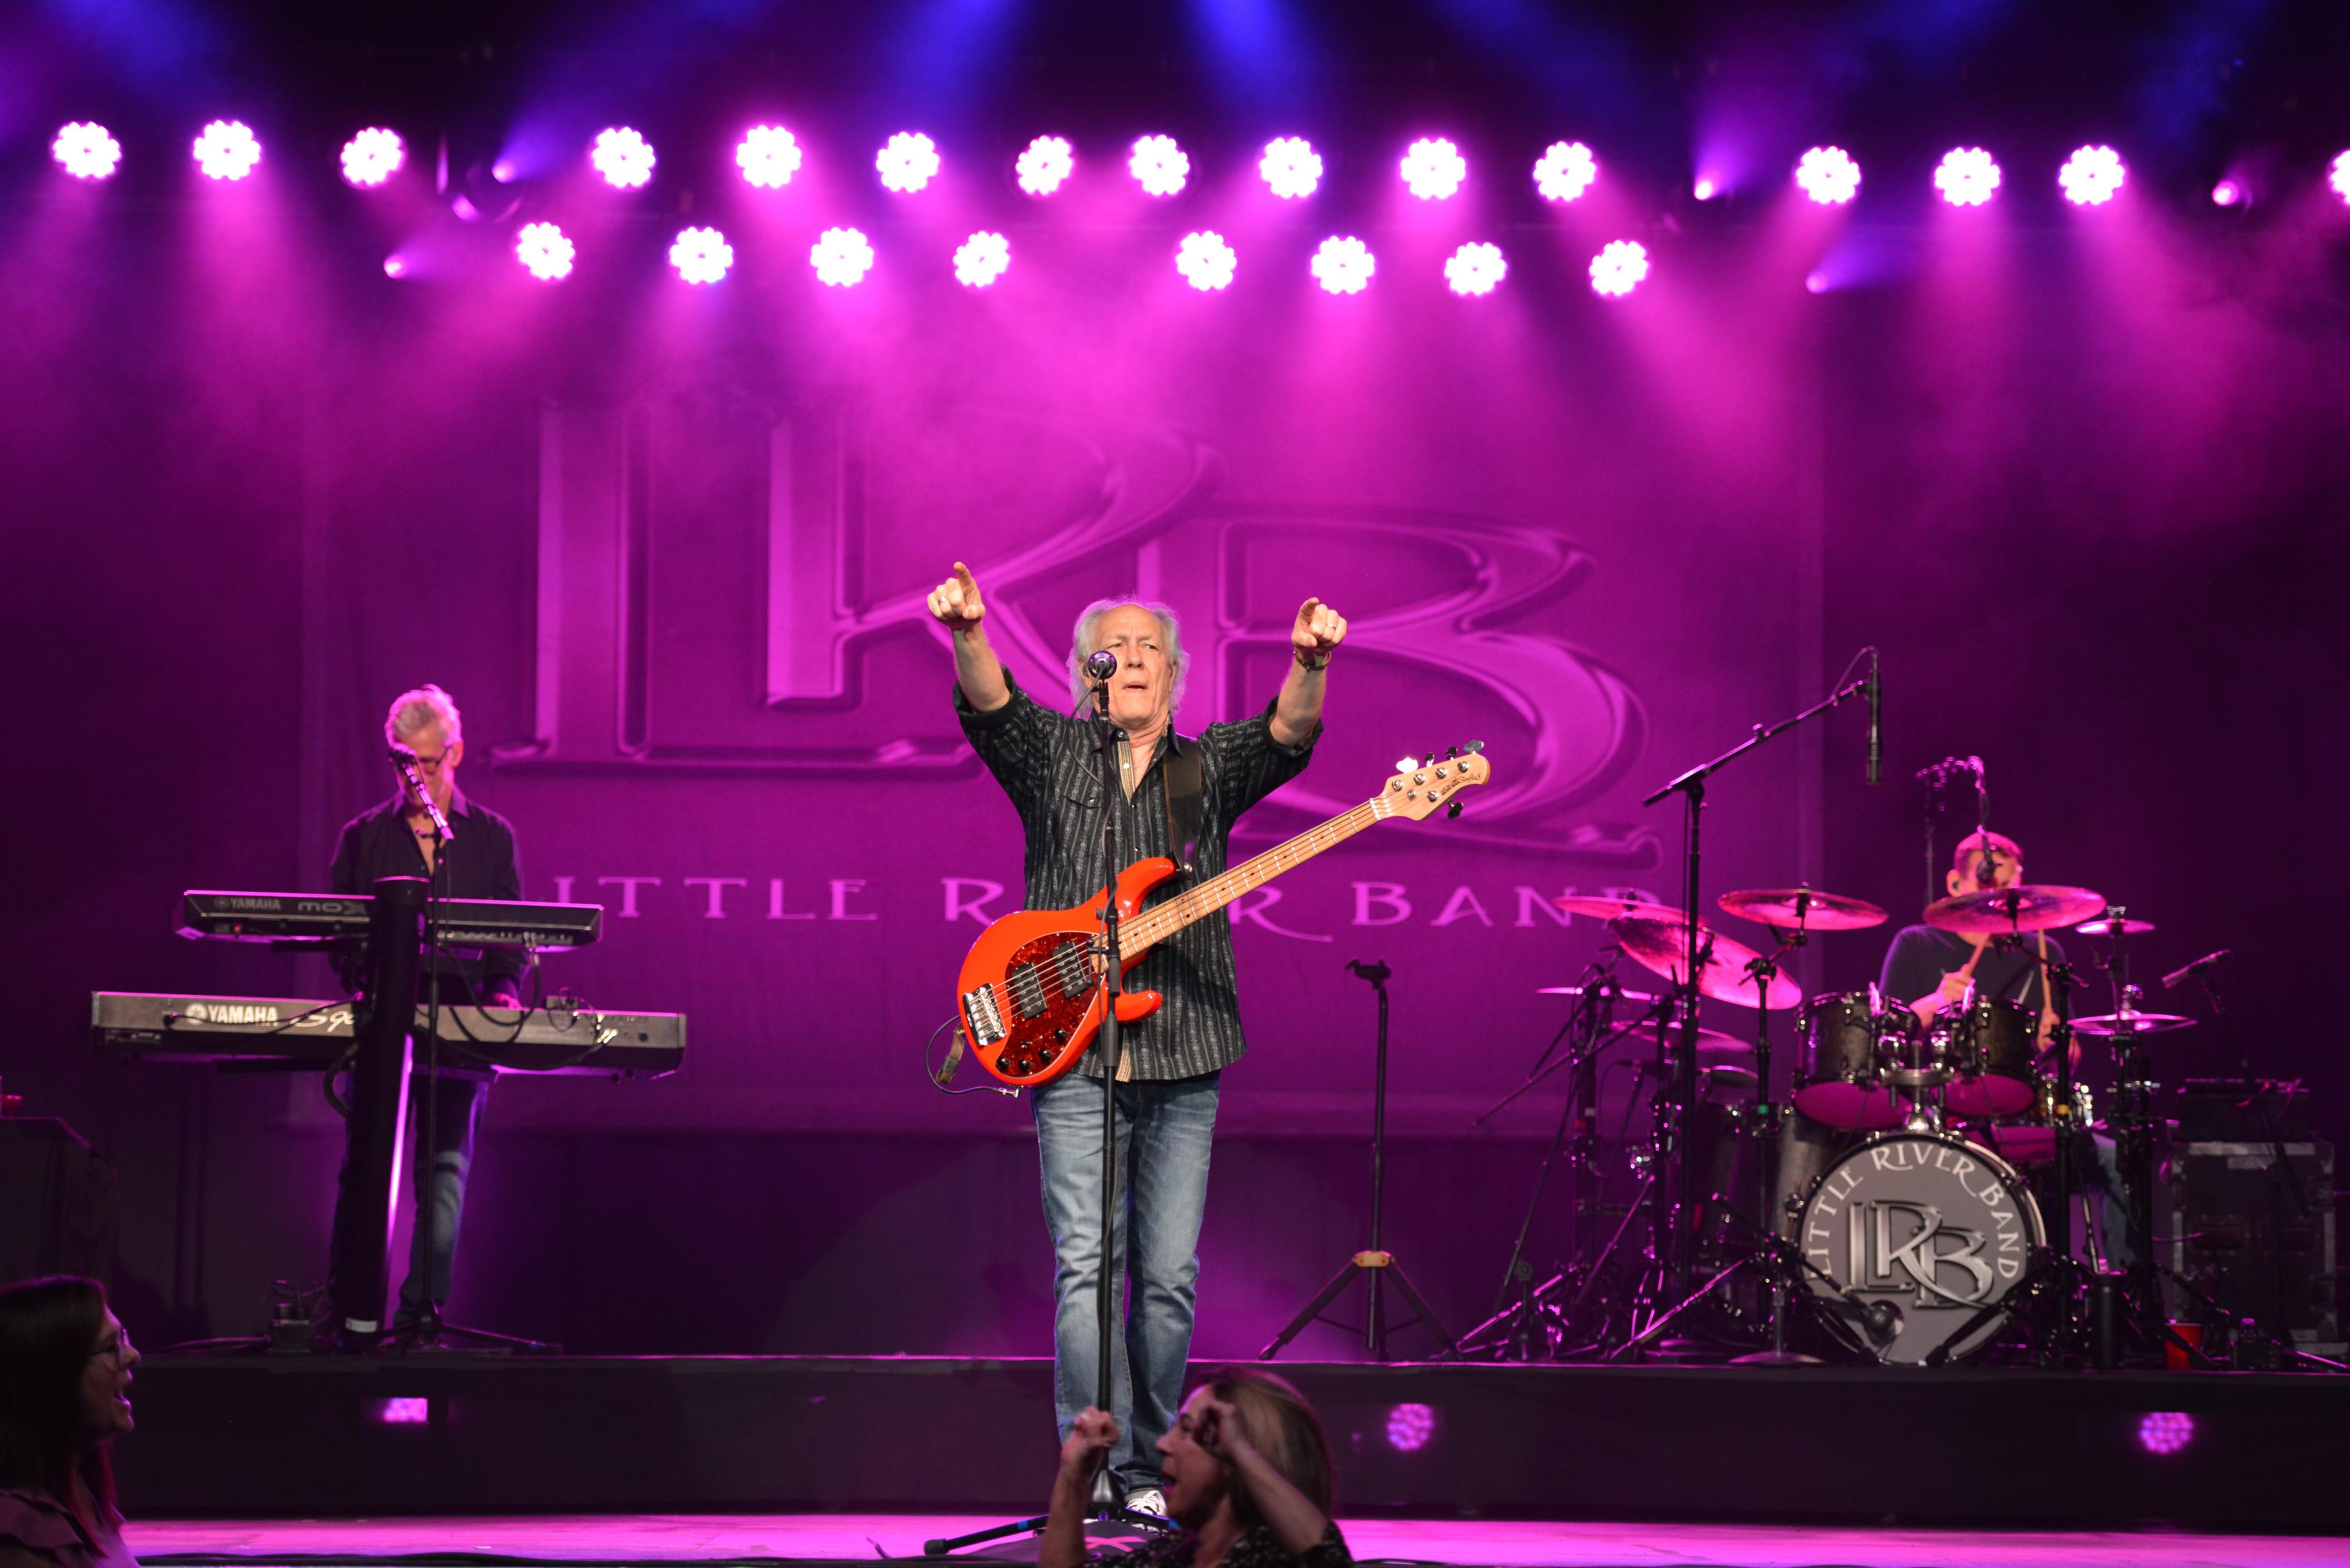 Little River Band at The Event Center at Hollywood Casino.